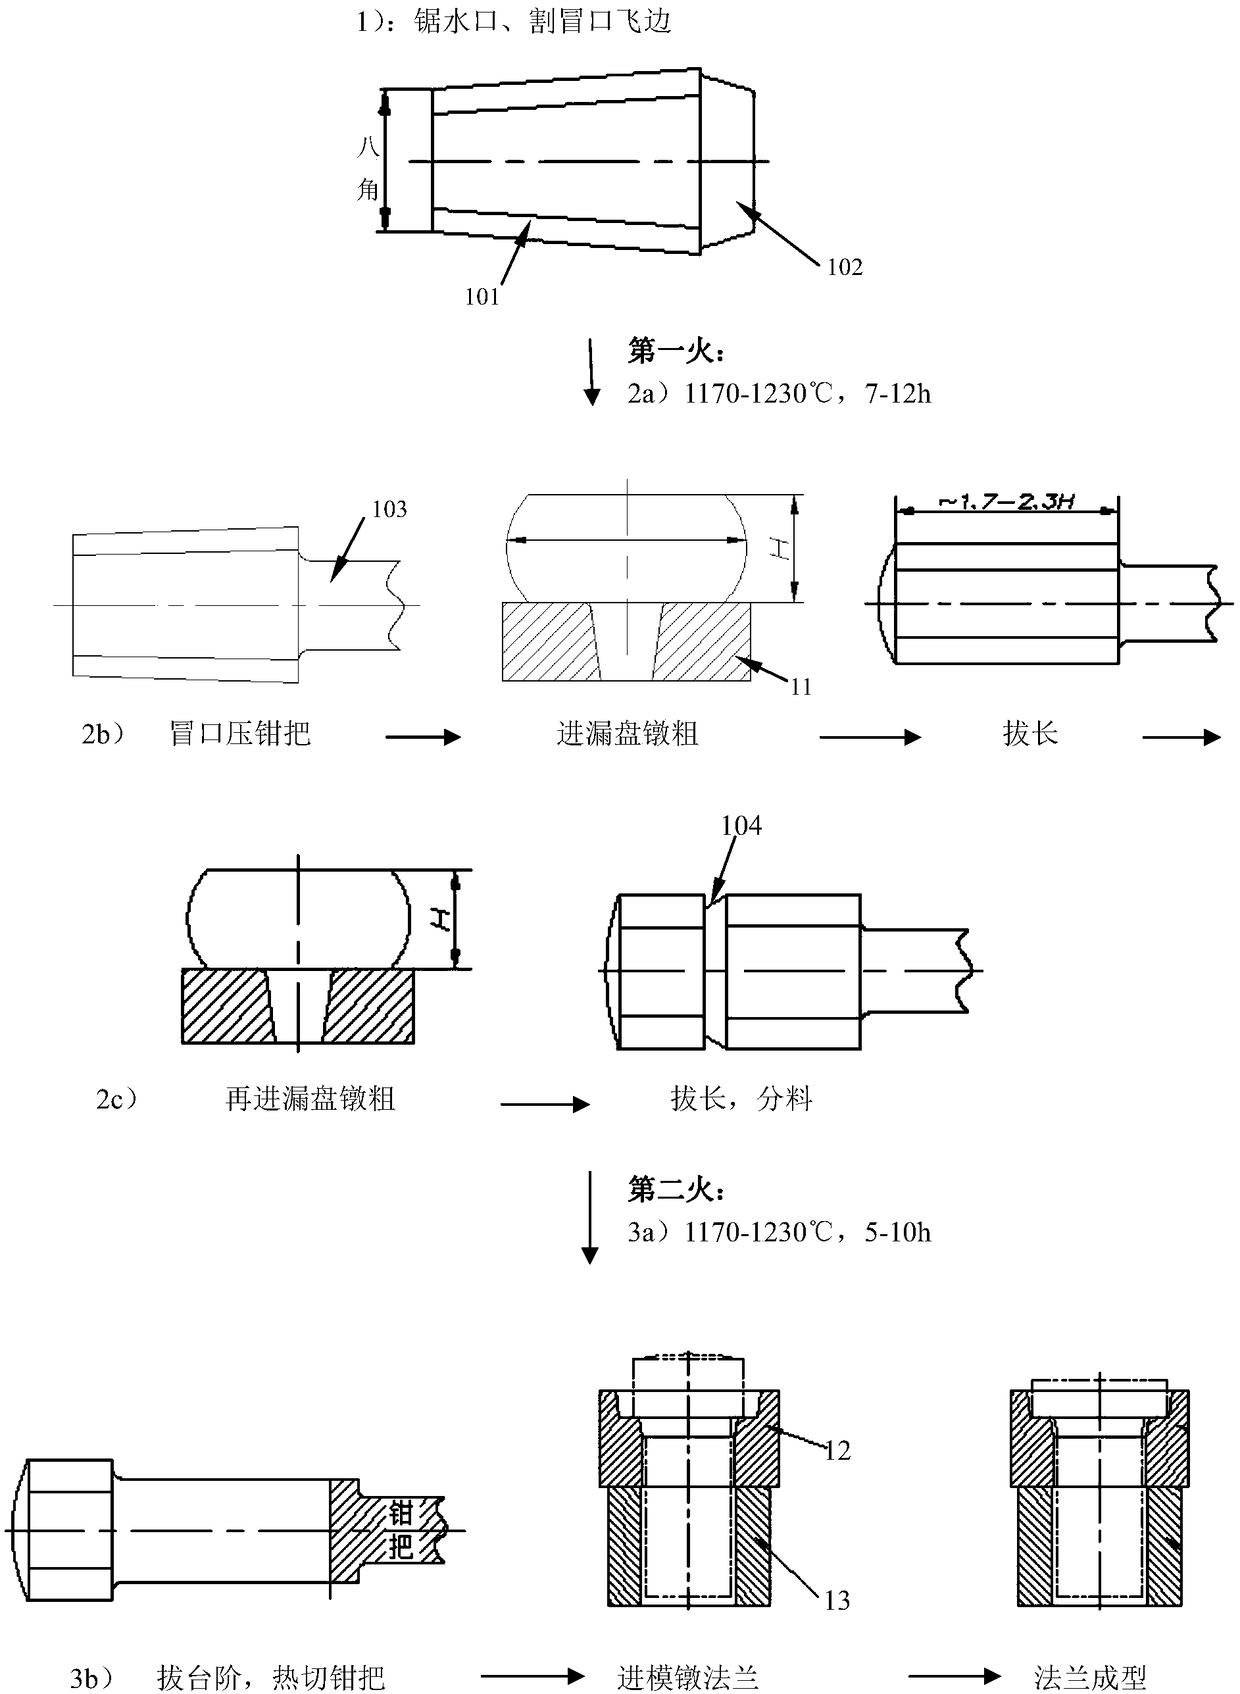 Rapid forming process of large flange of high-power wind power main shaft